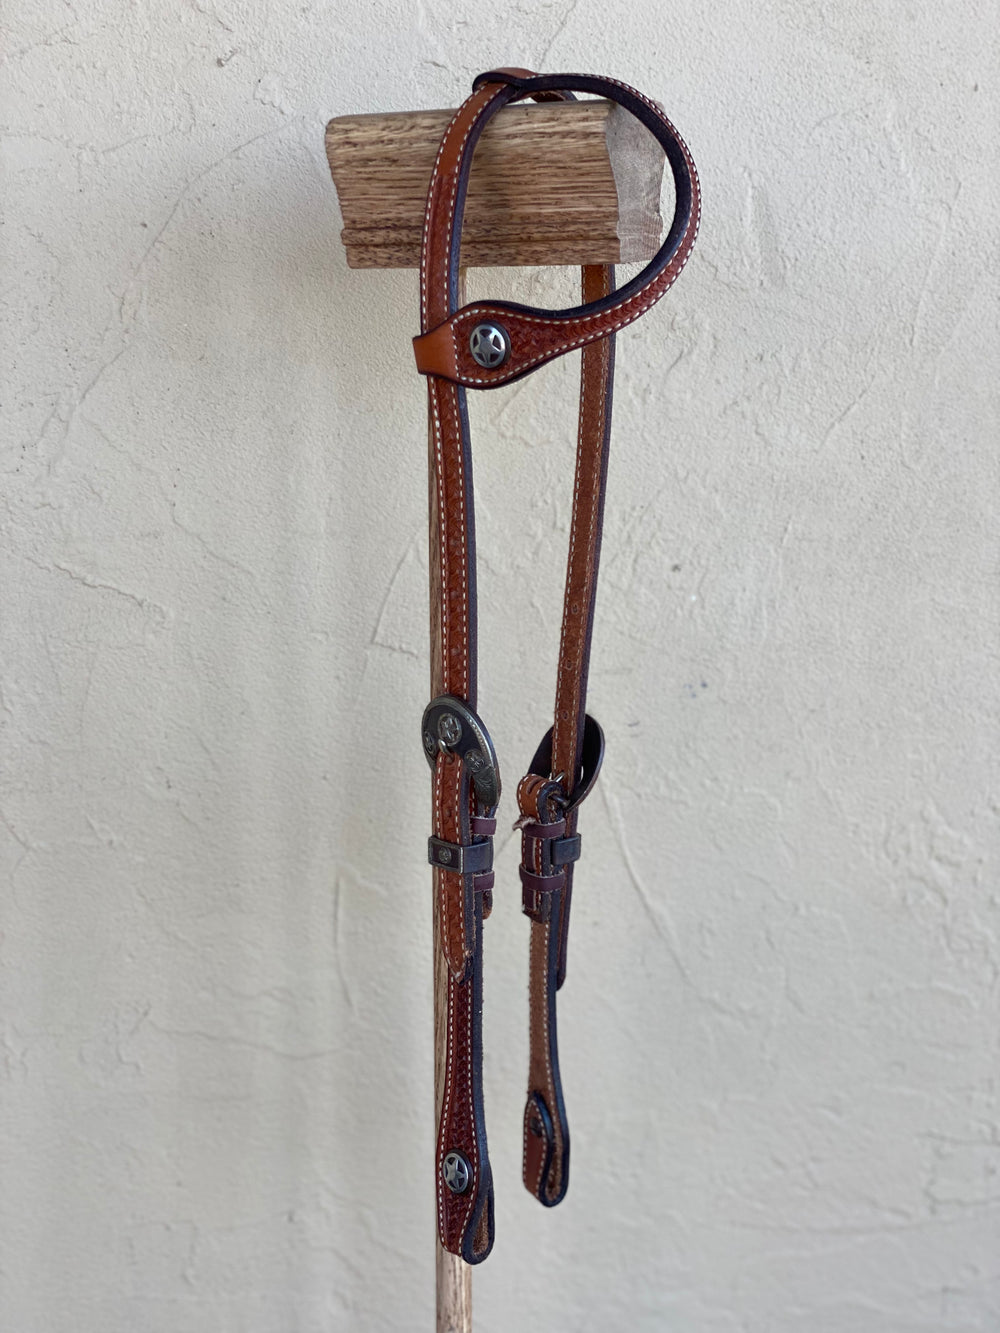 Stamped One Ear Headstall with Buckles and Conchos